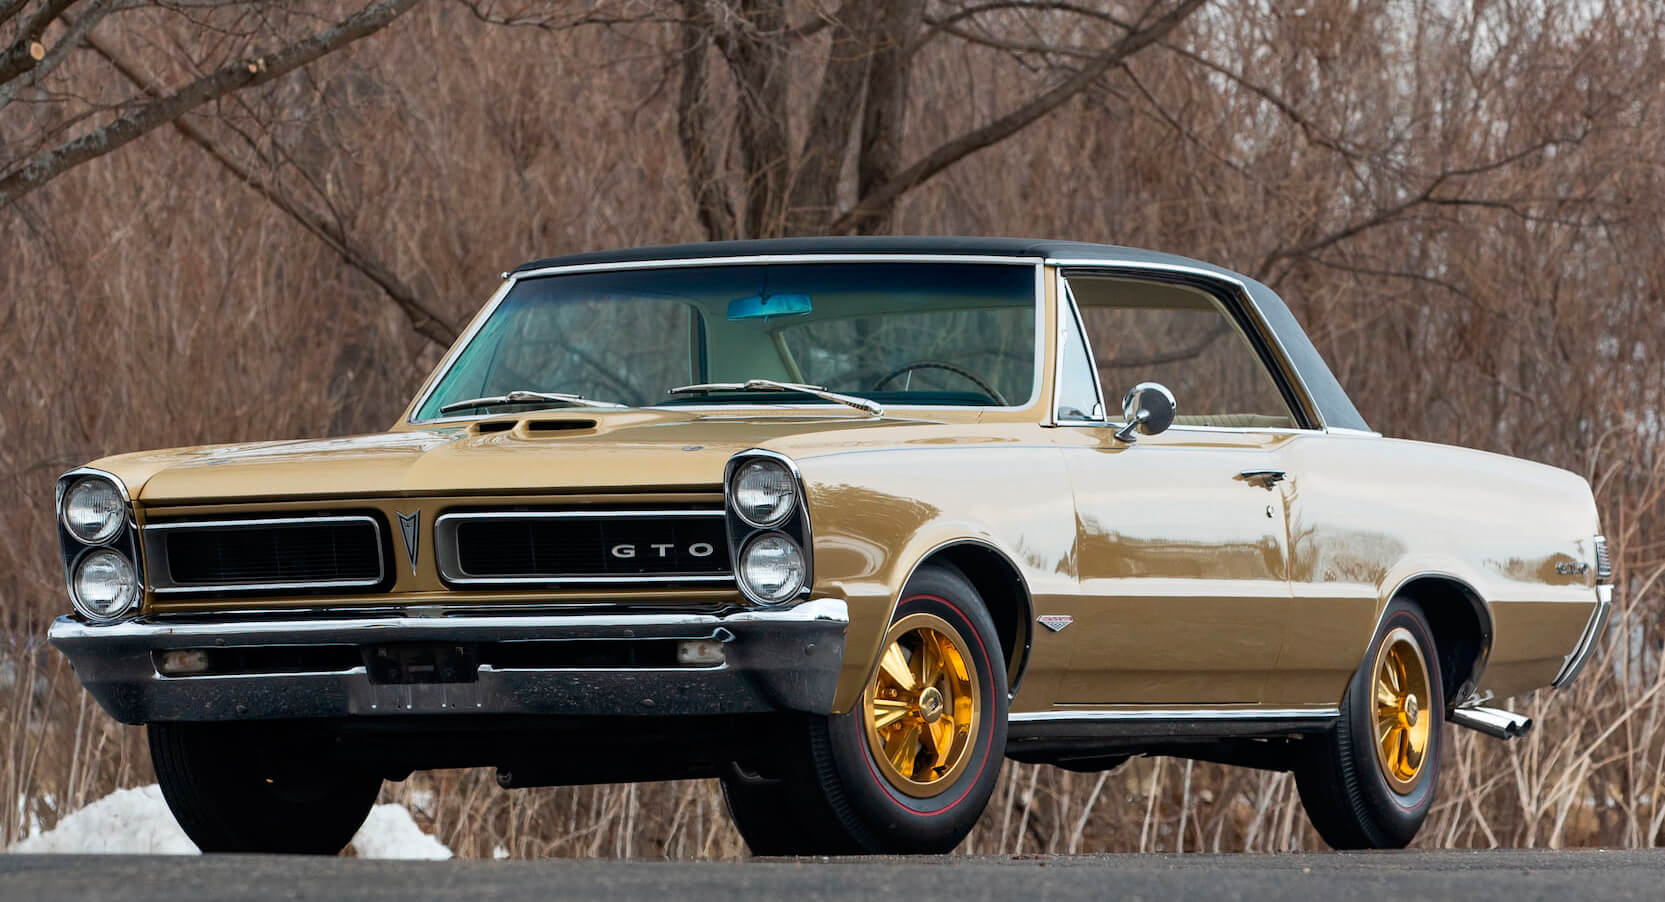 Pontiac S 1965 Hurst Geeto Tiger Is Probably The Most Famous Gto Out There Carscoops